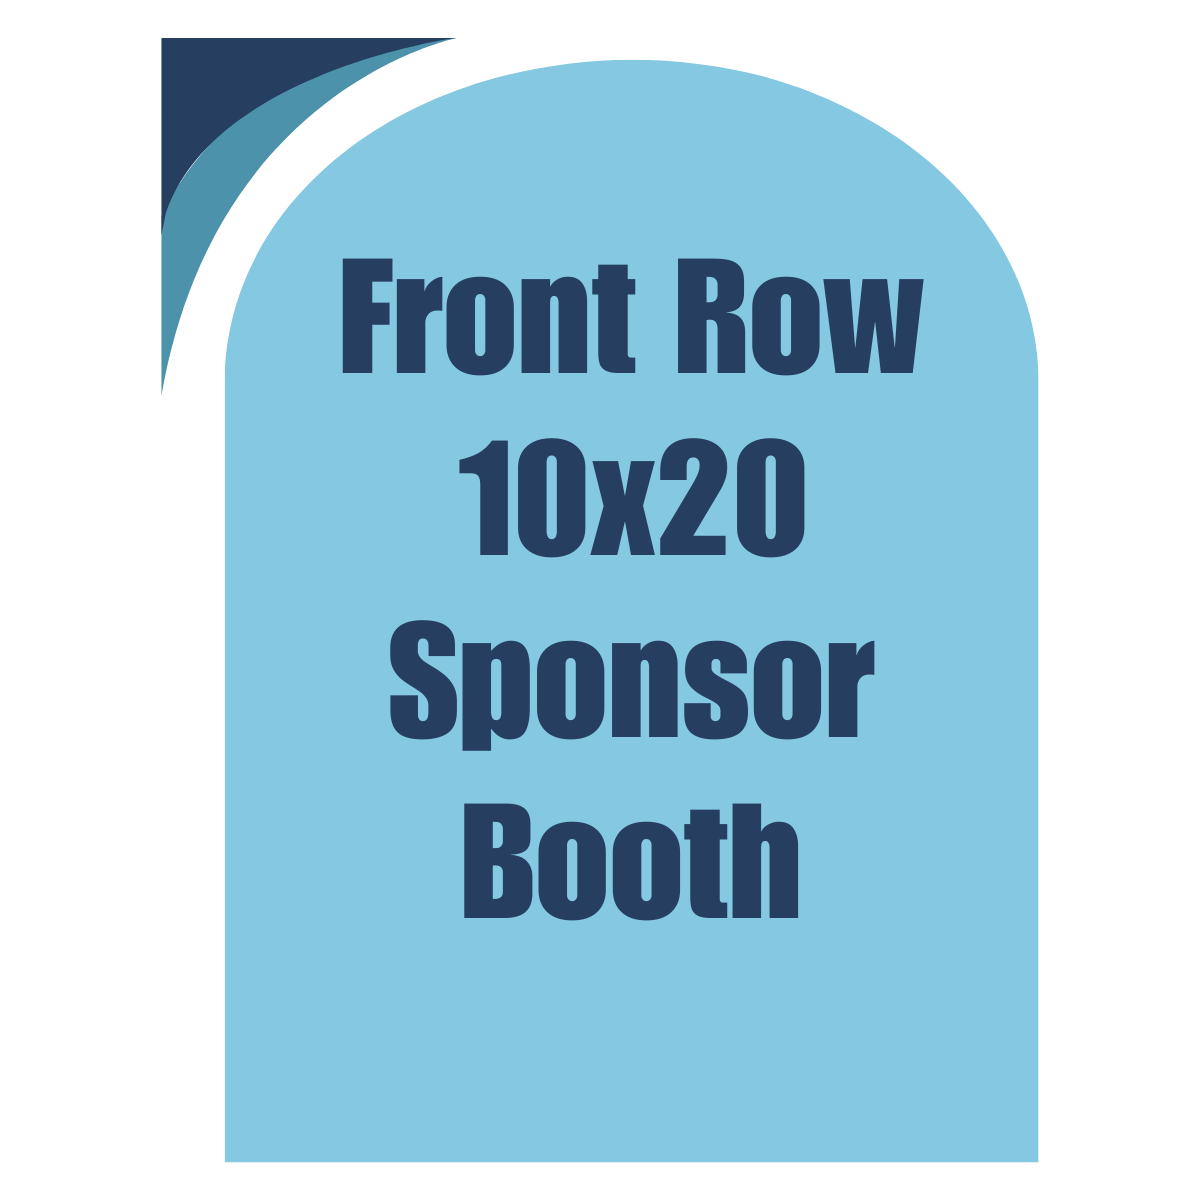 Front Row 10x20 Sponsor Booth